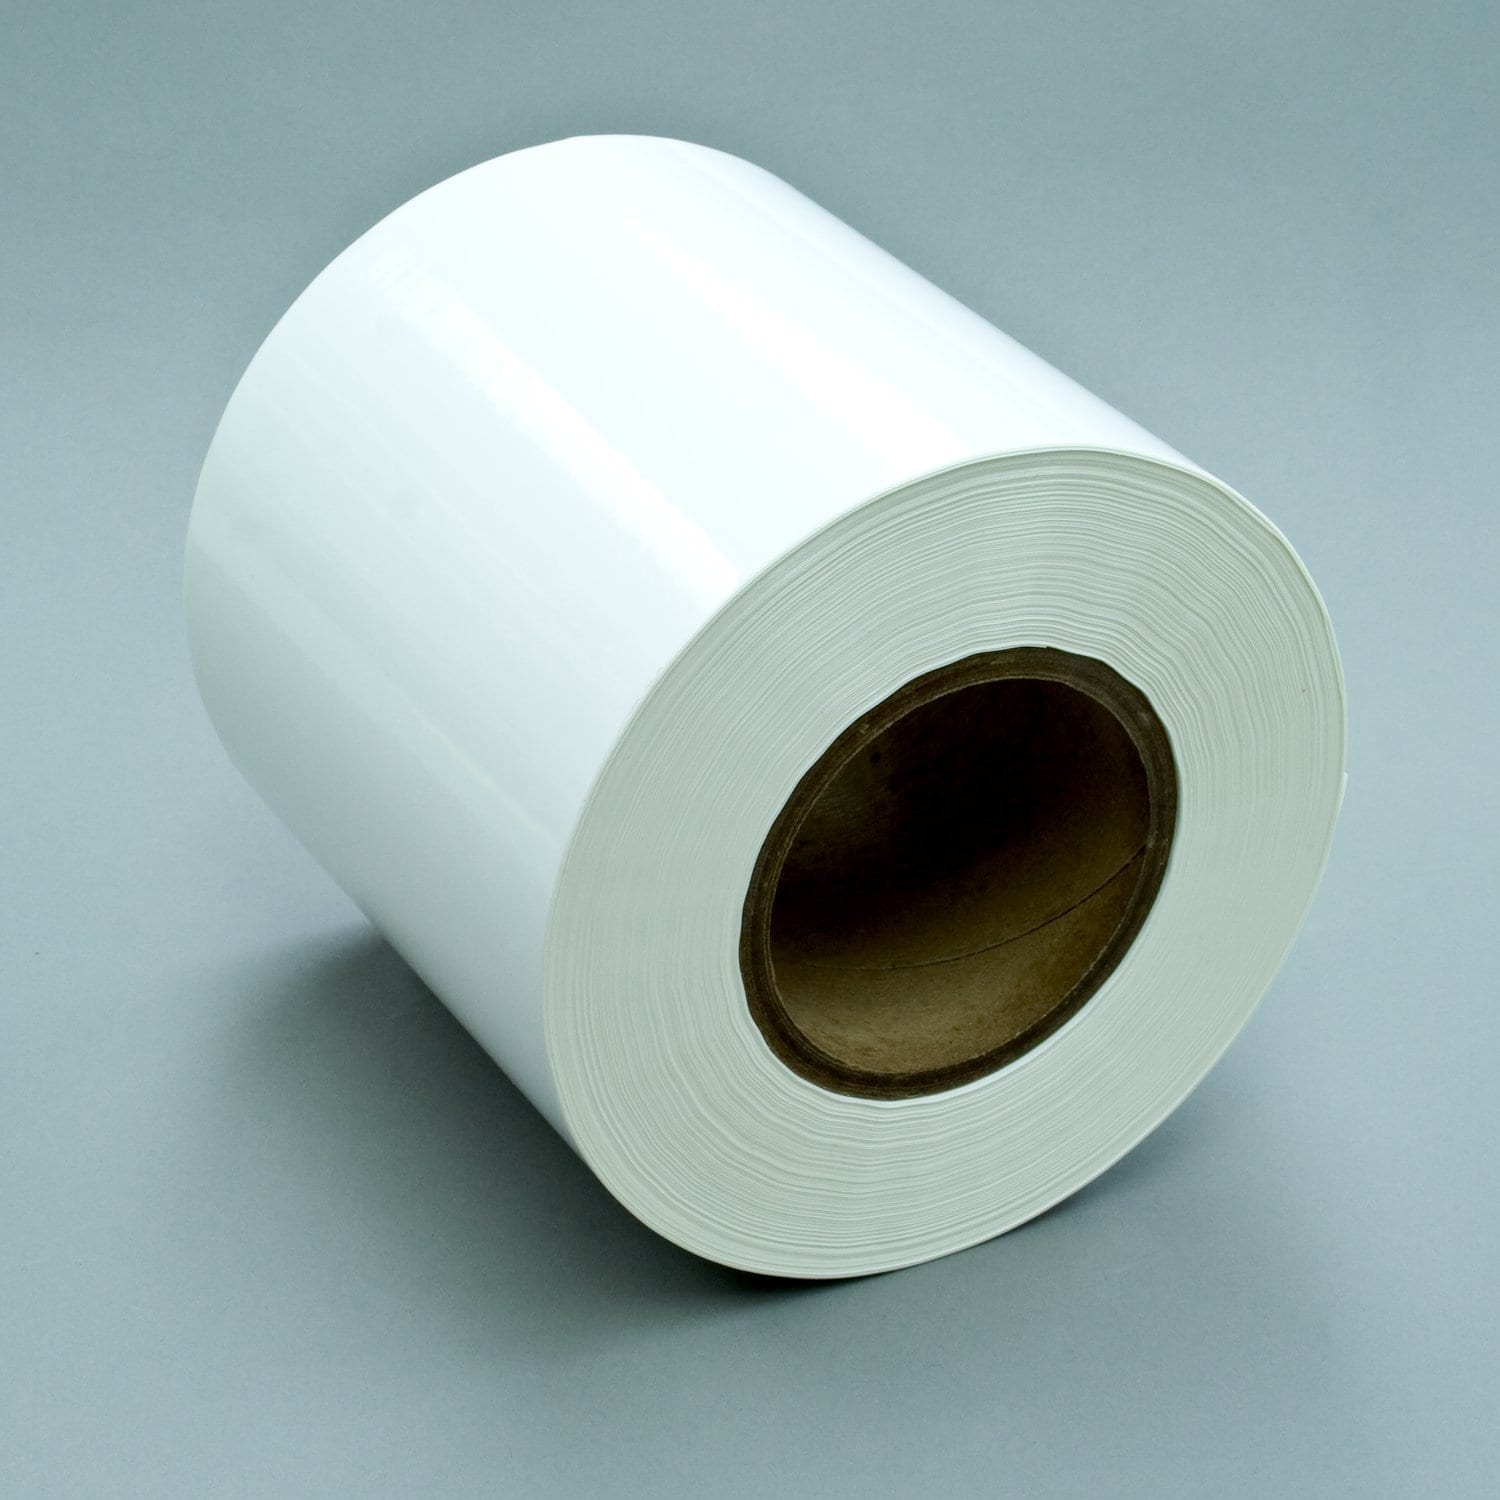 7100073723 - 3M Sheet and Screen Label Material 7034, White Polyester, Roll, Config